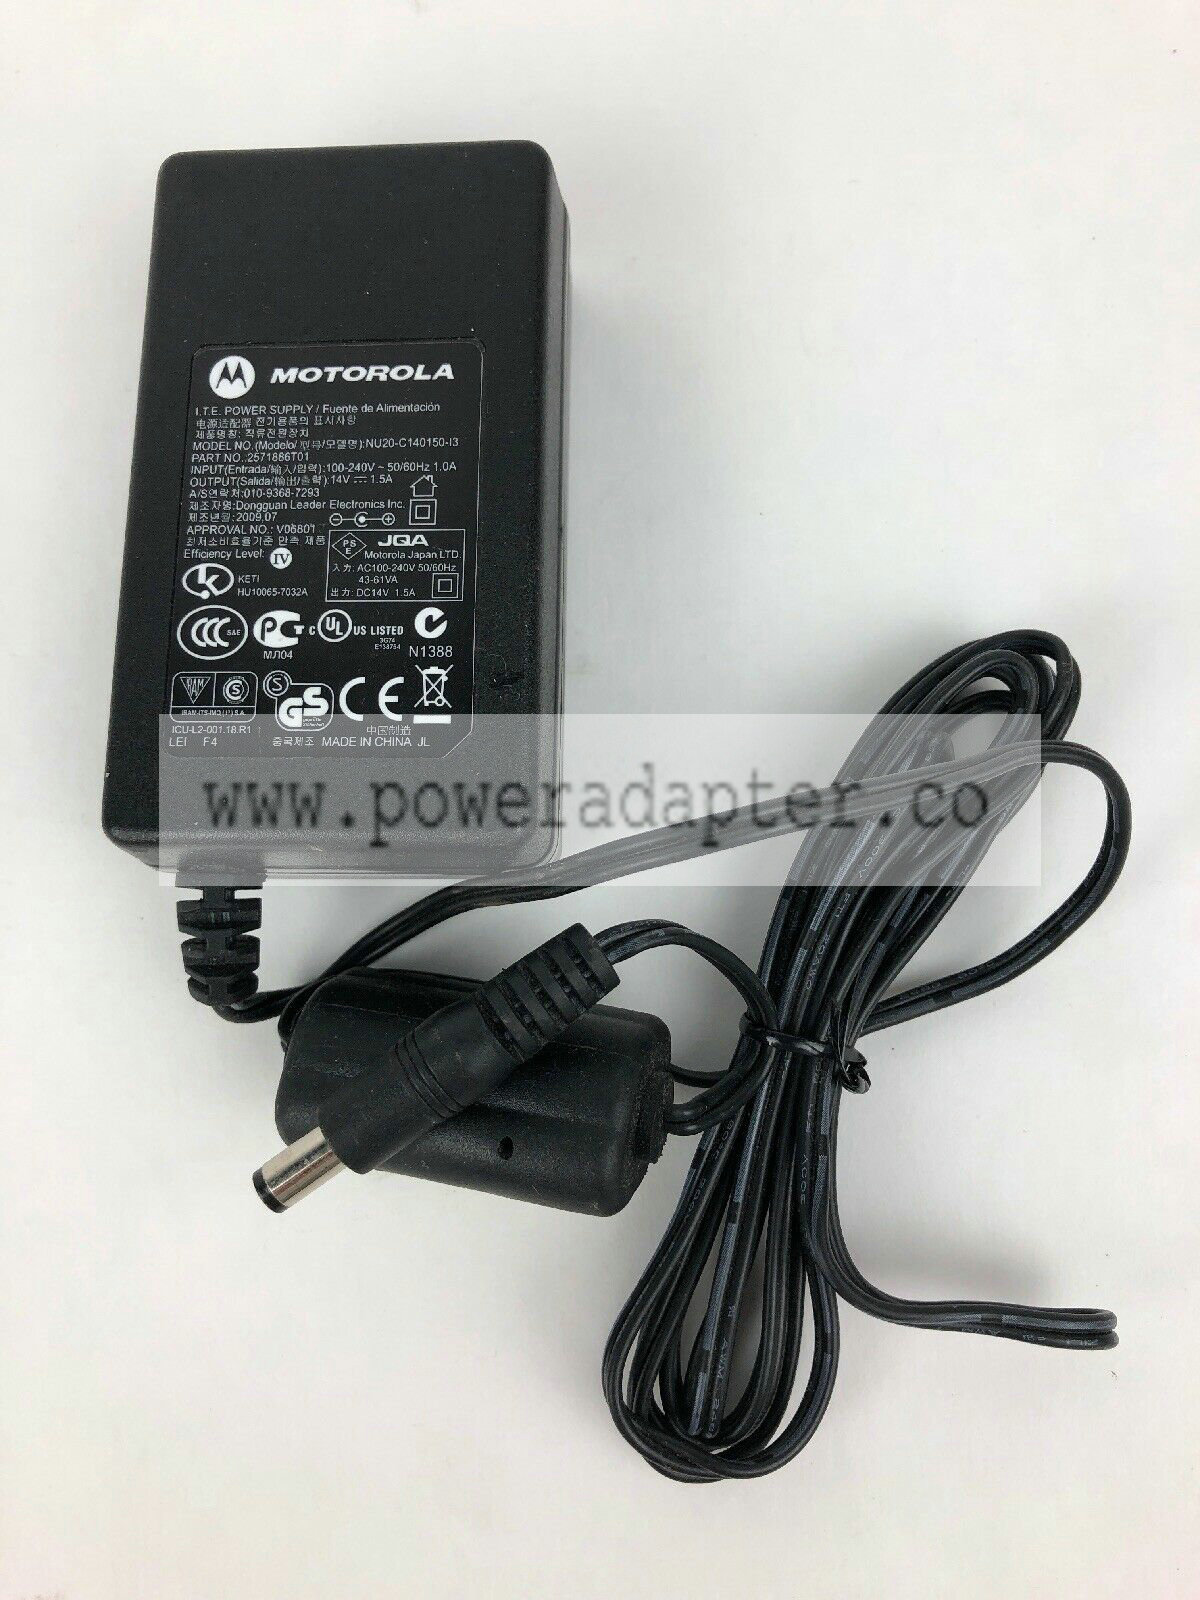 MOTOROLA AC ADAPTER MODEL NU20-C140150-13 Power Supply Cord Charger Brand: Motorola Model: NU20-C140150-13 Non-Dome - Click Image to Close